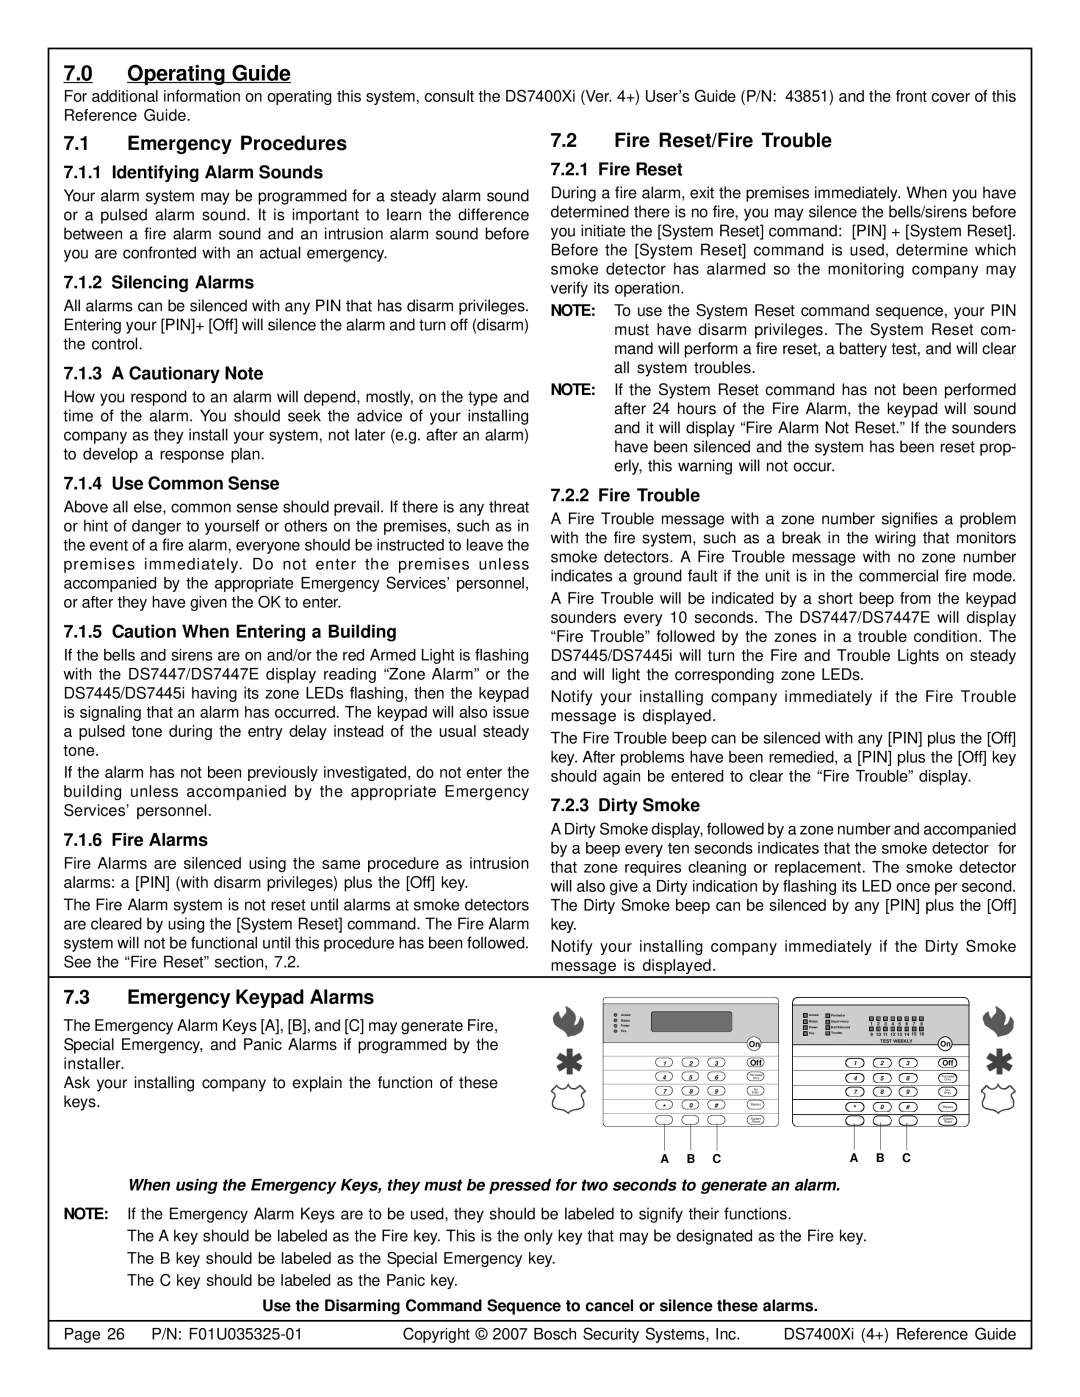 Bosch Appliances DS7400XI Identifying Alarm Sounds, Silencing Alarms, A Cautionary Note, Fire Reset, Use Common Sense 